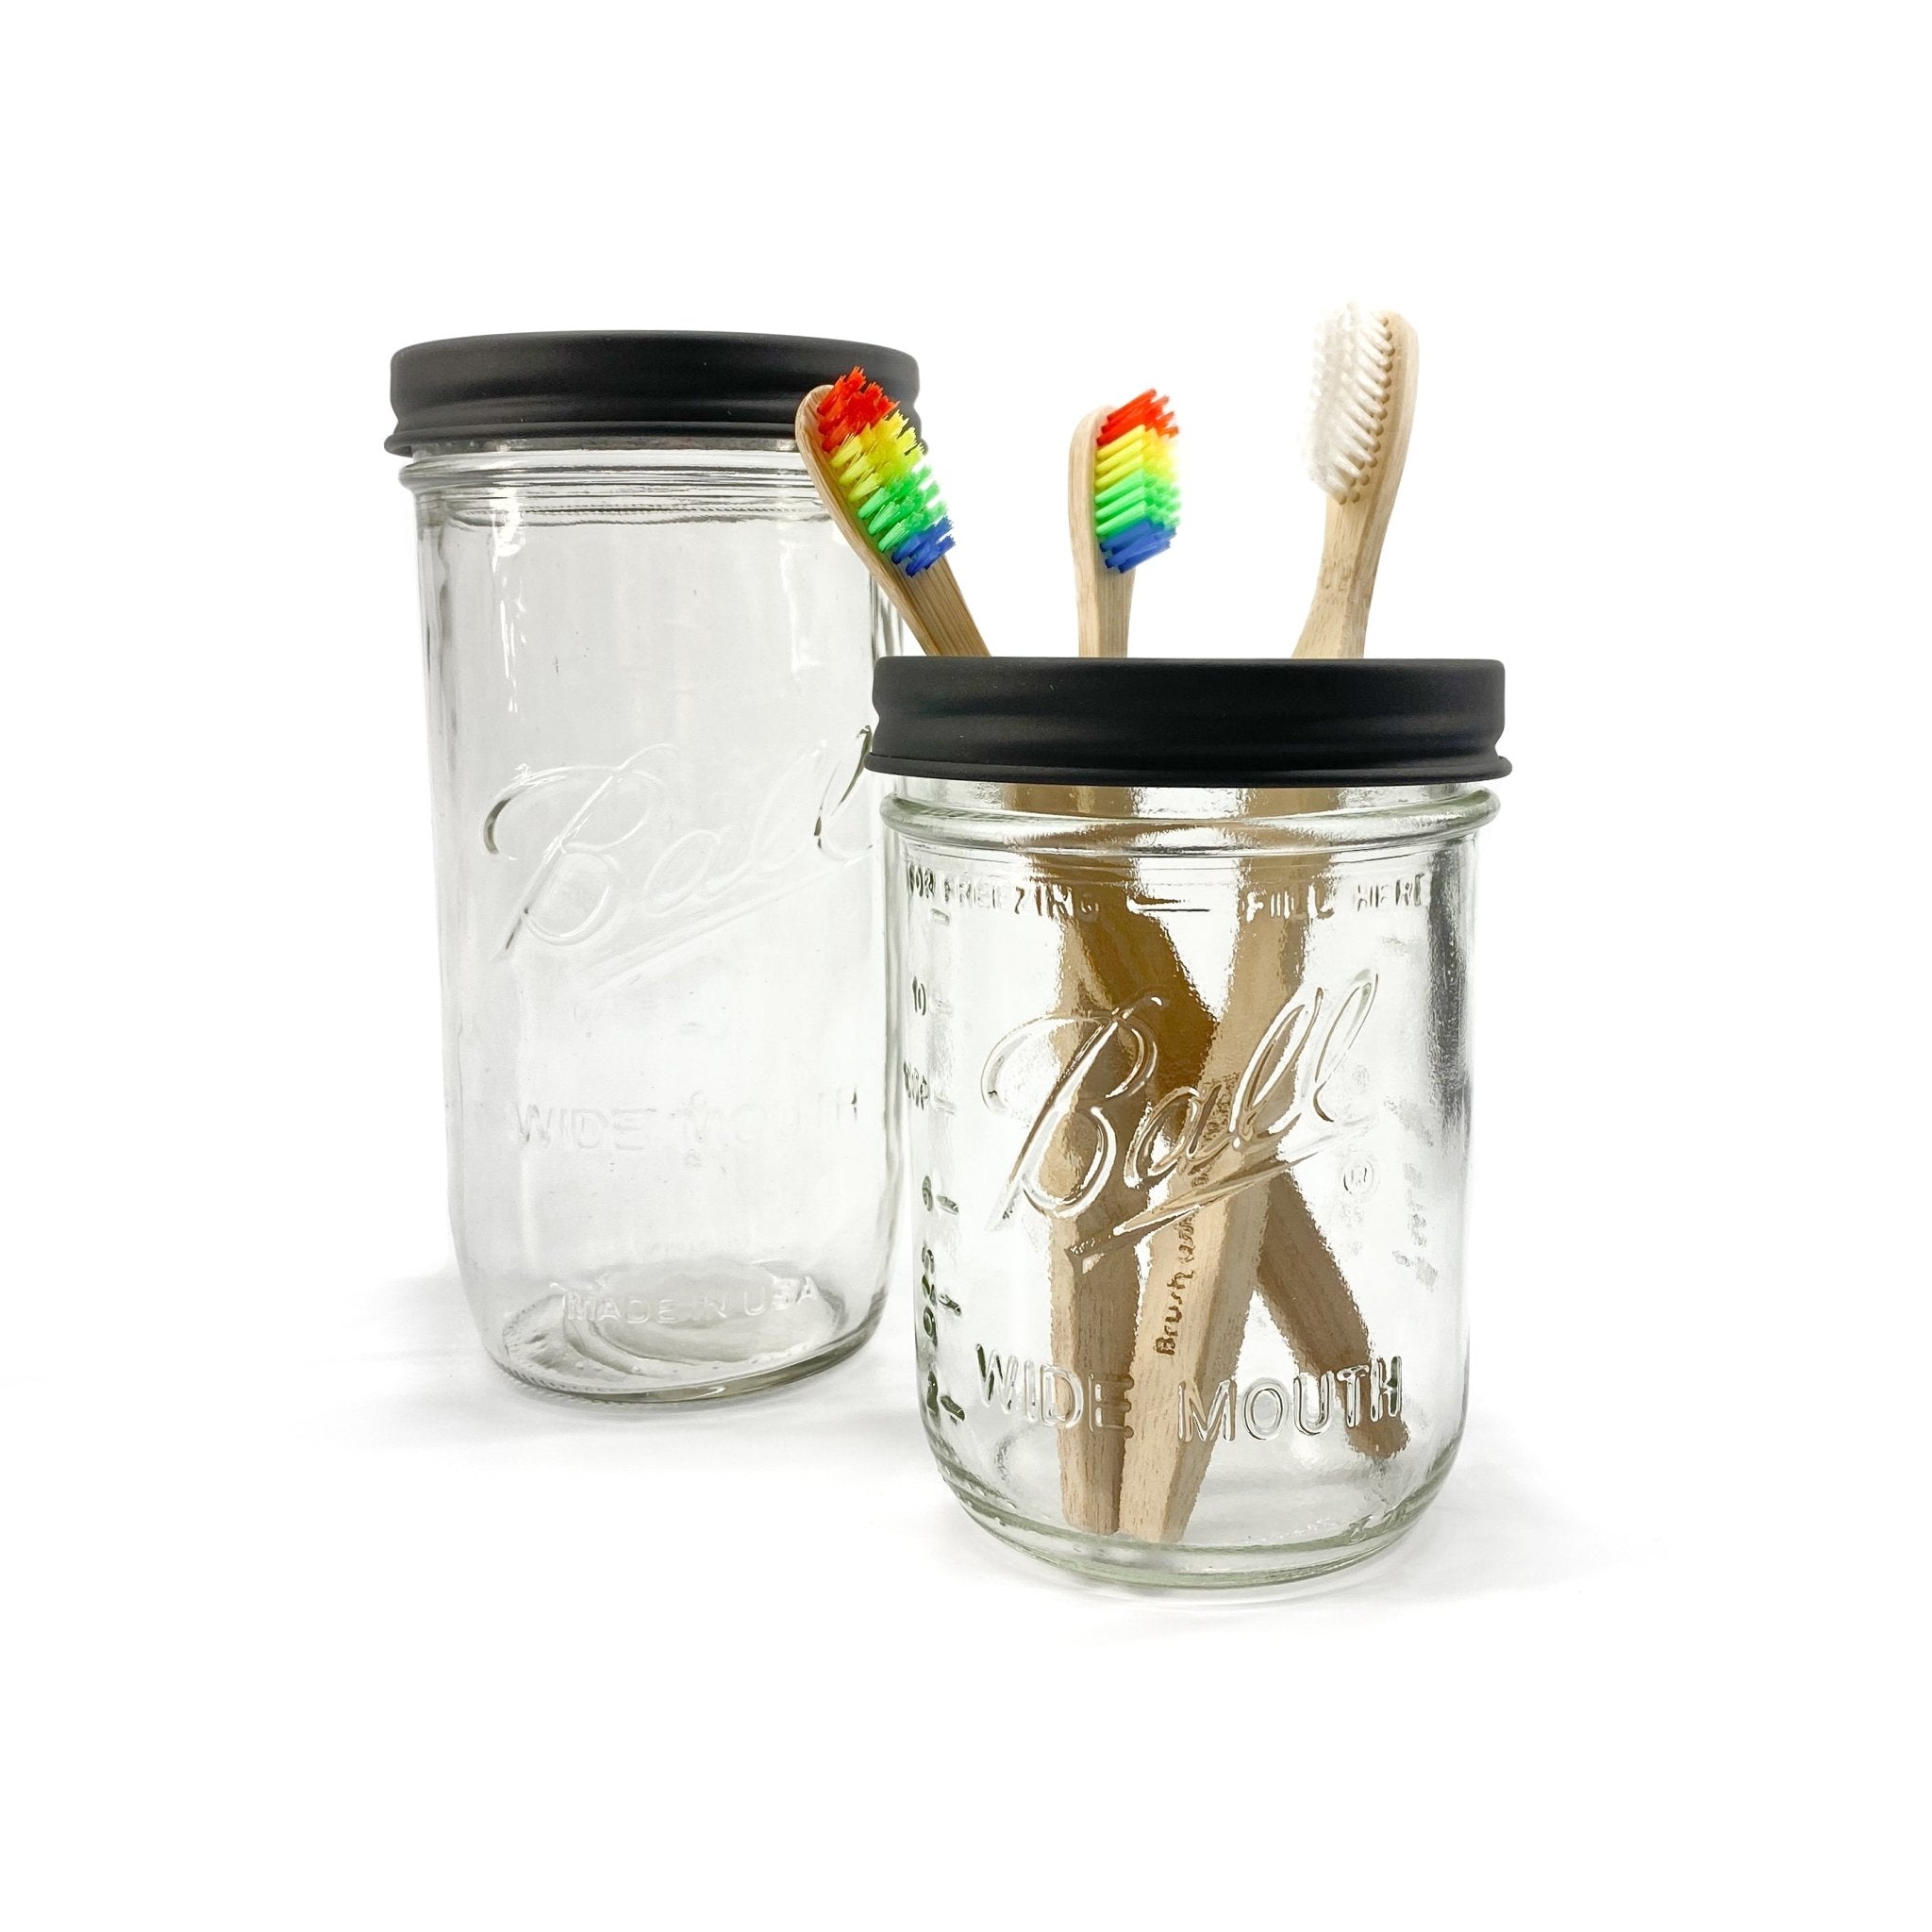 Toothbrush Holder Jar: Wide Mouth - Marley's Monsters